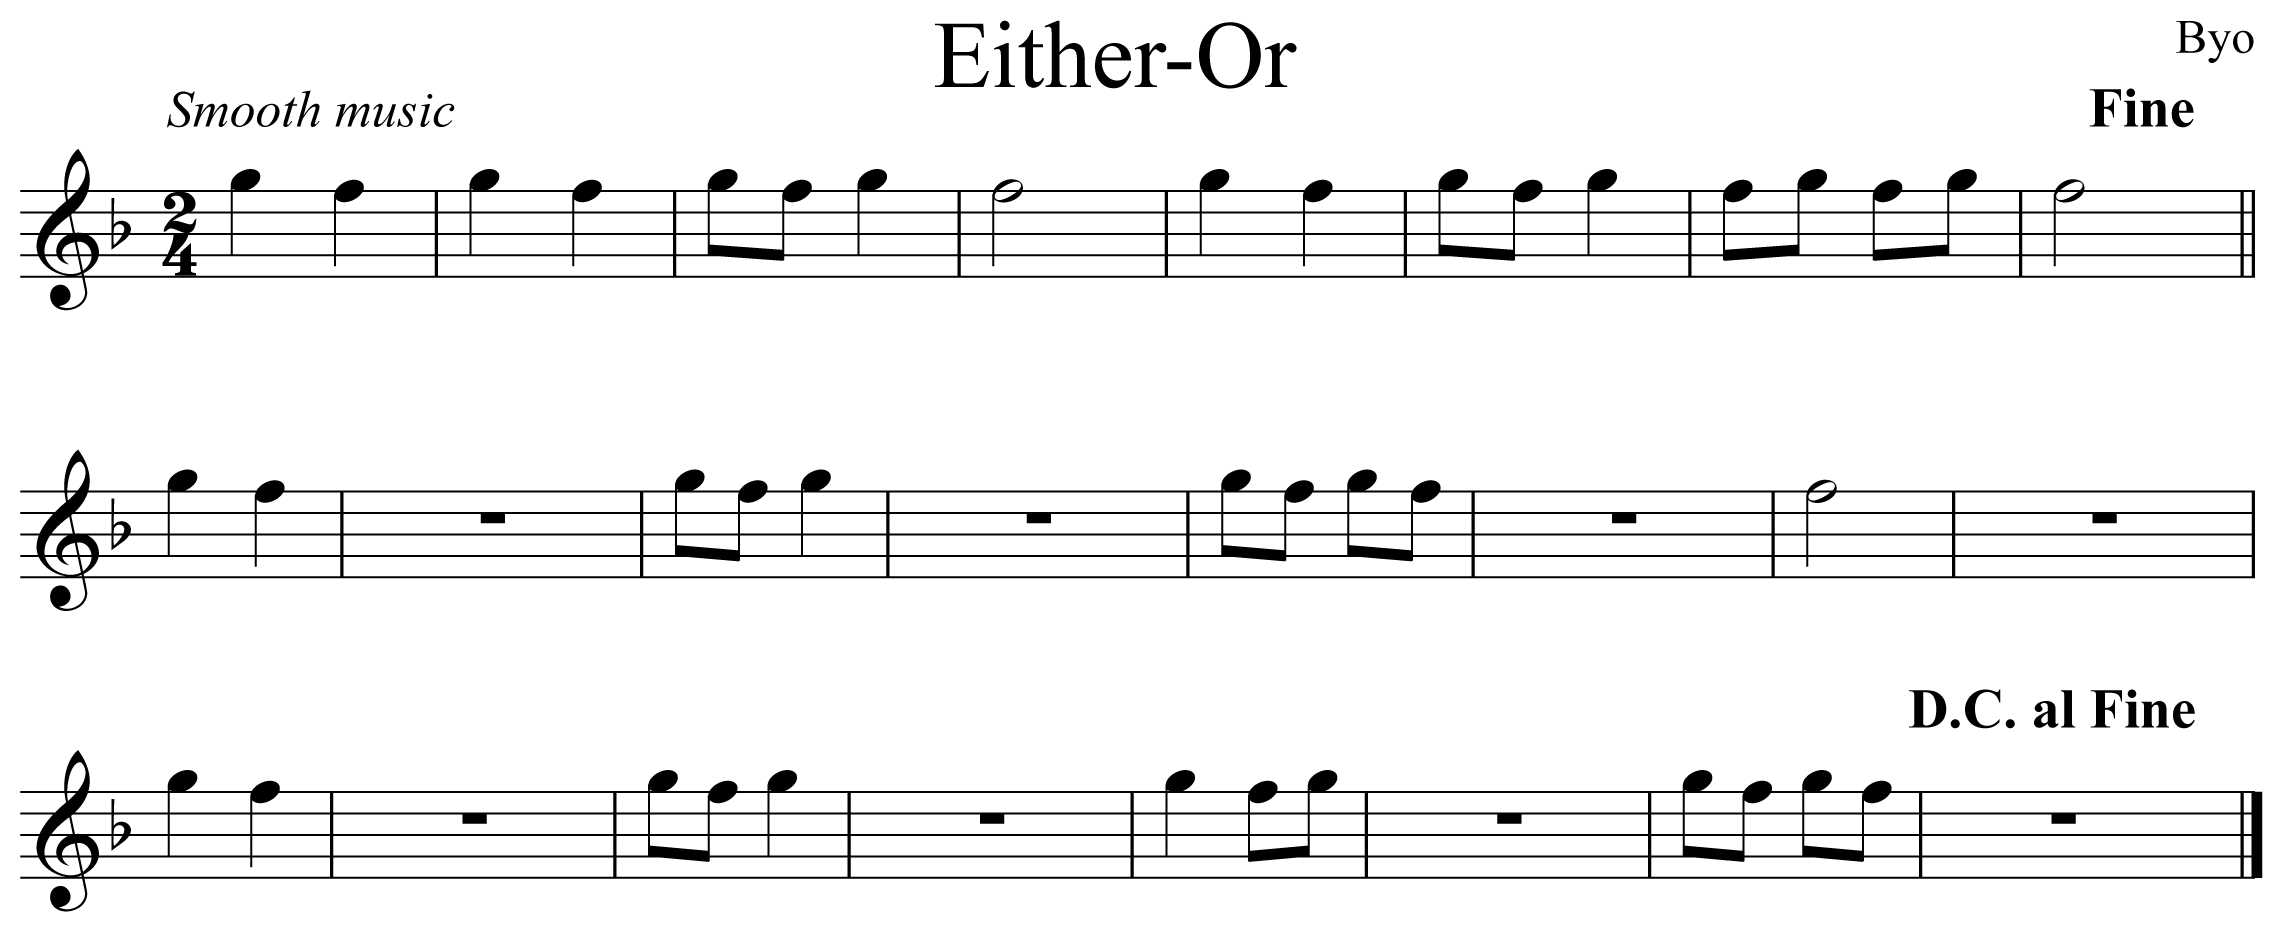 Either Or Flute Music Notation